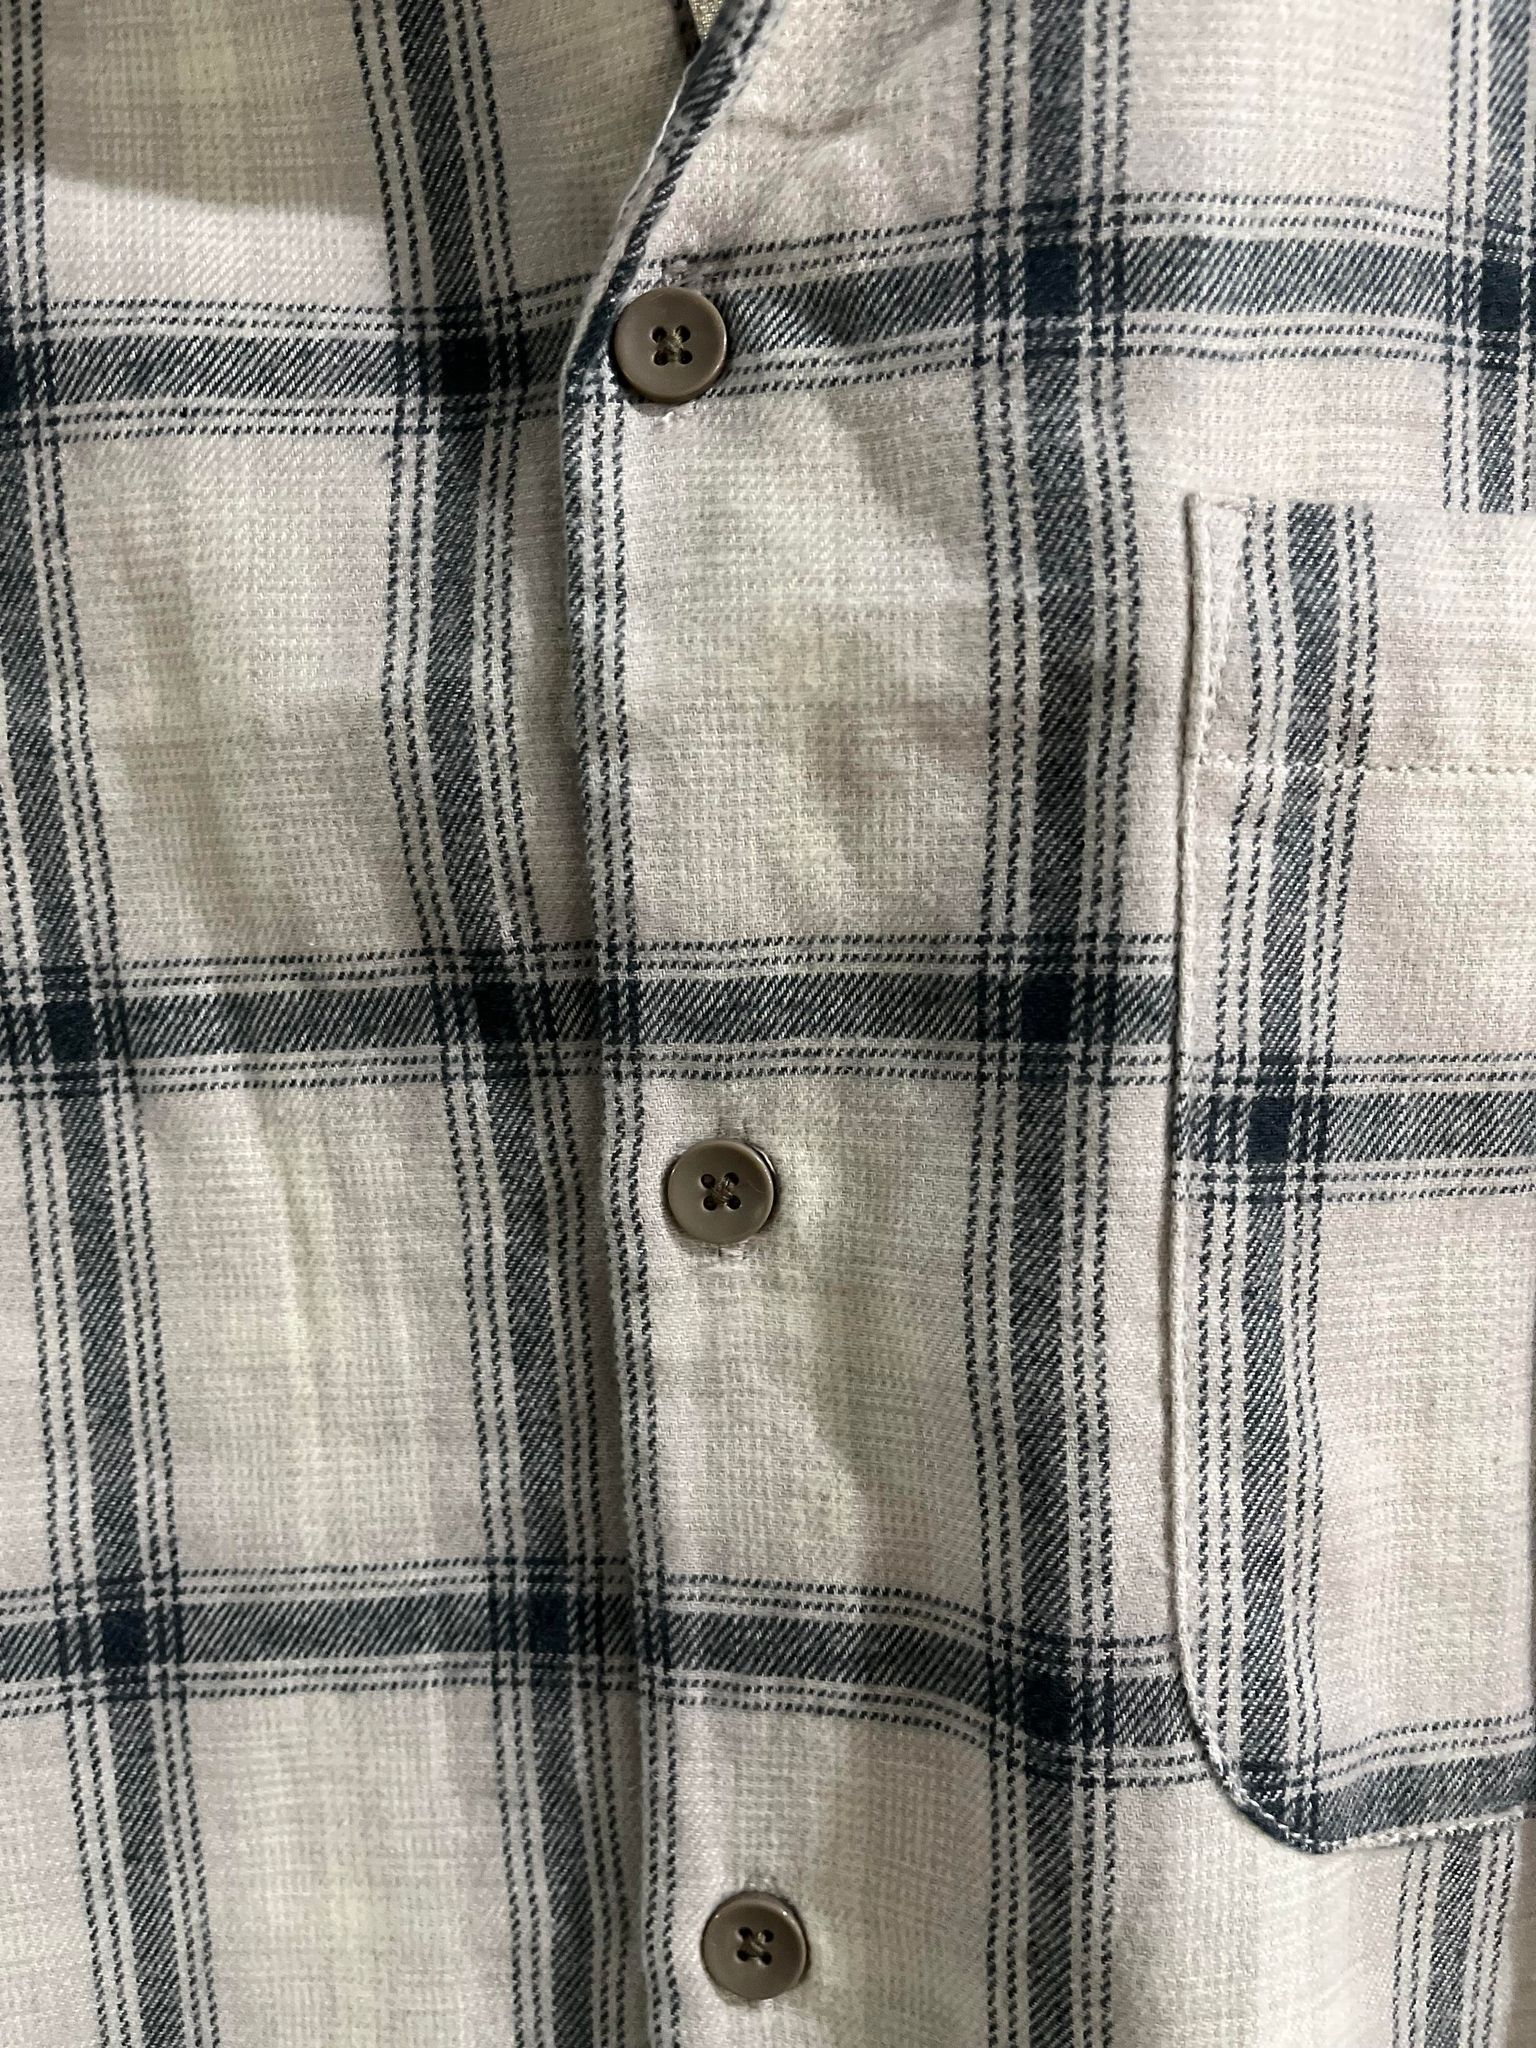 Urban Outfitters Men’s Flannel Shirt Size M, Cream/Blue, Standard/Cloth